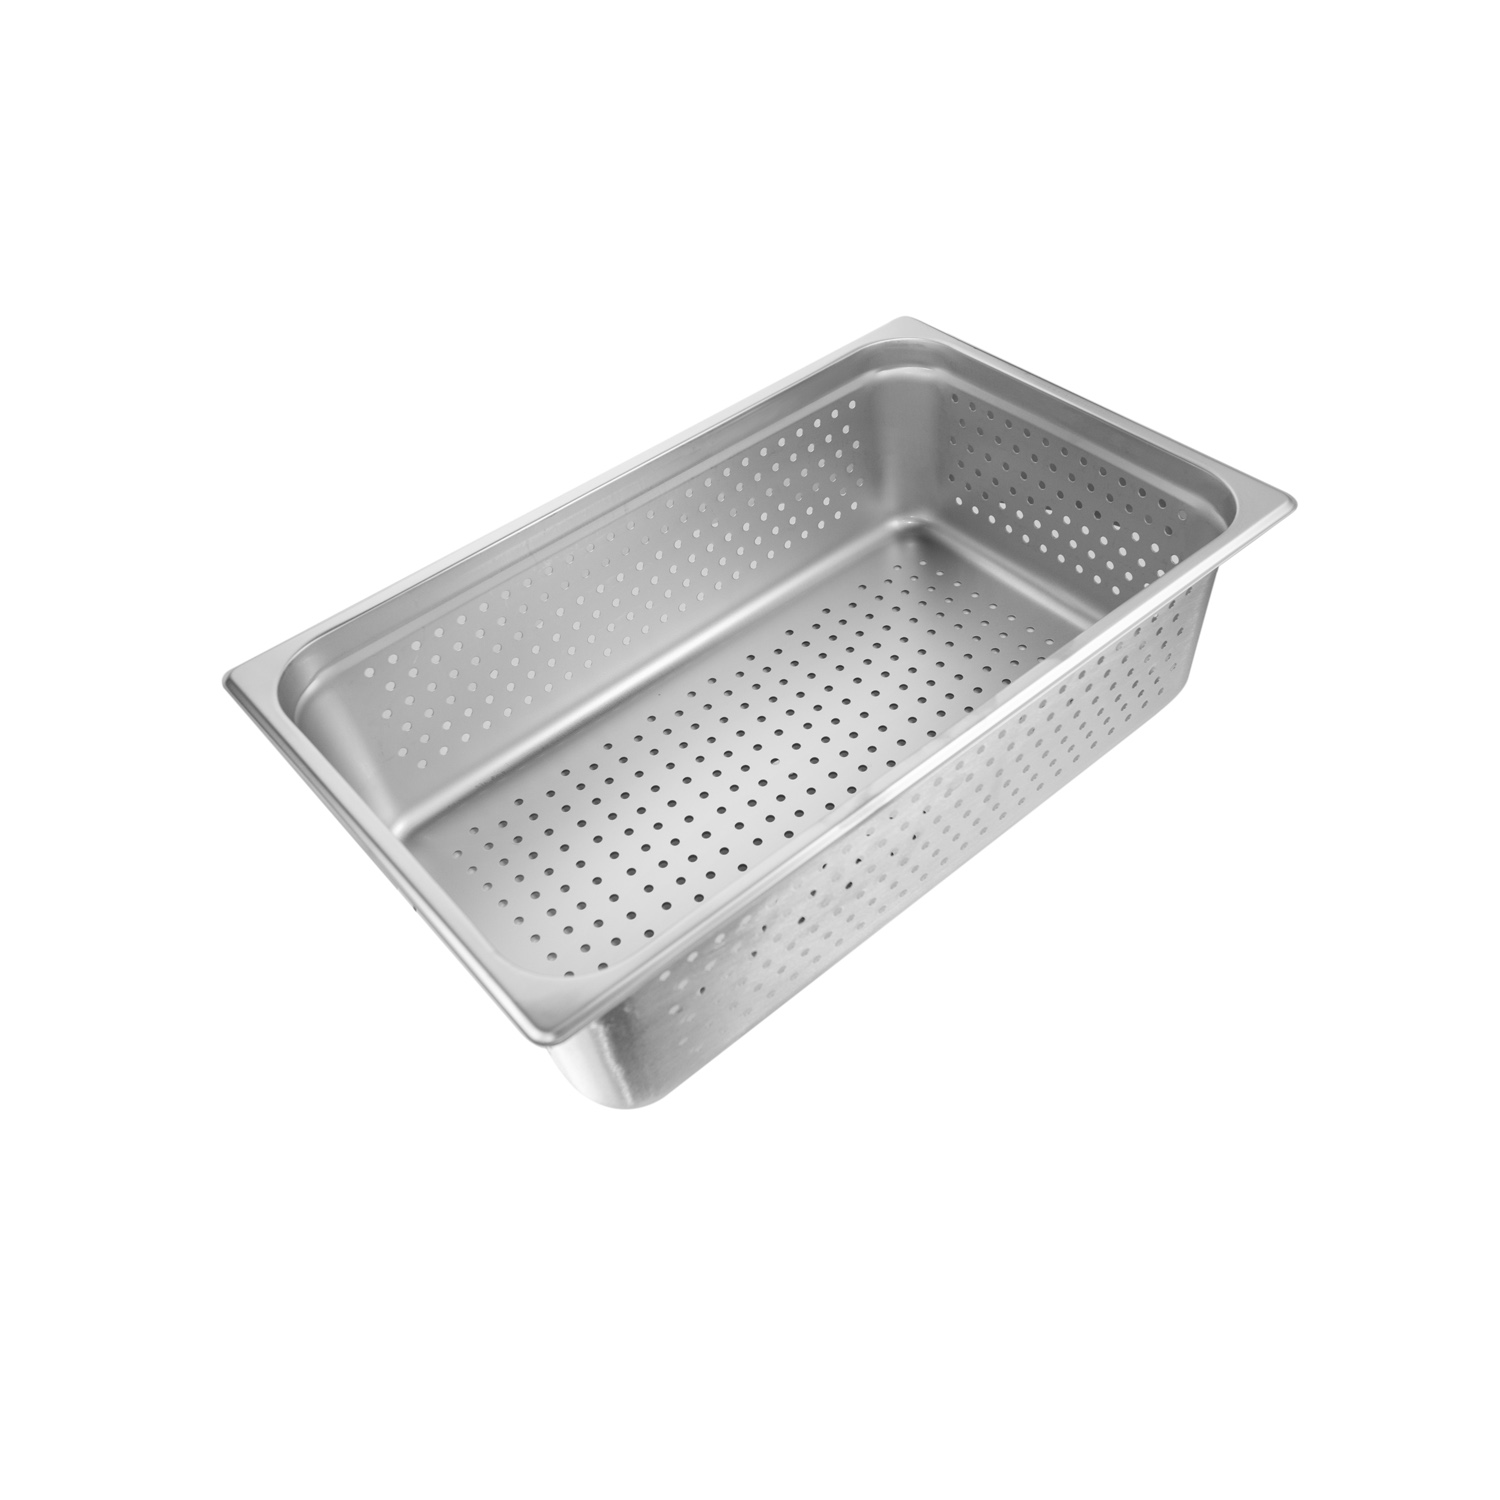 CAC China SSPF-24-6P Full Size 24-Gauge Perforated Stainless Steel Steam Pan 6"